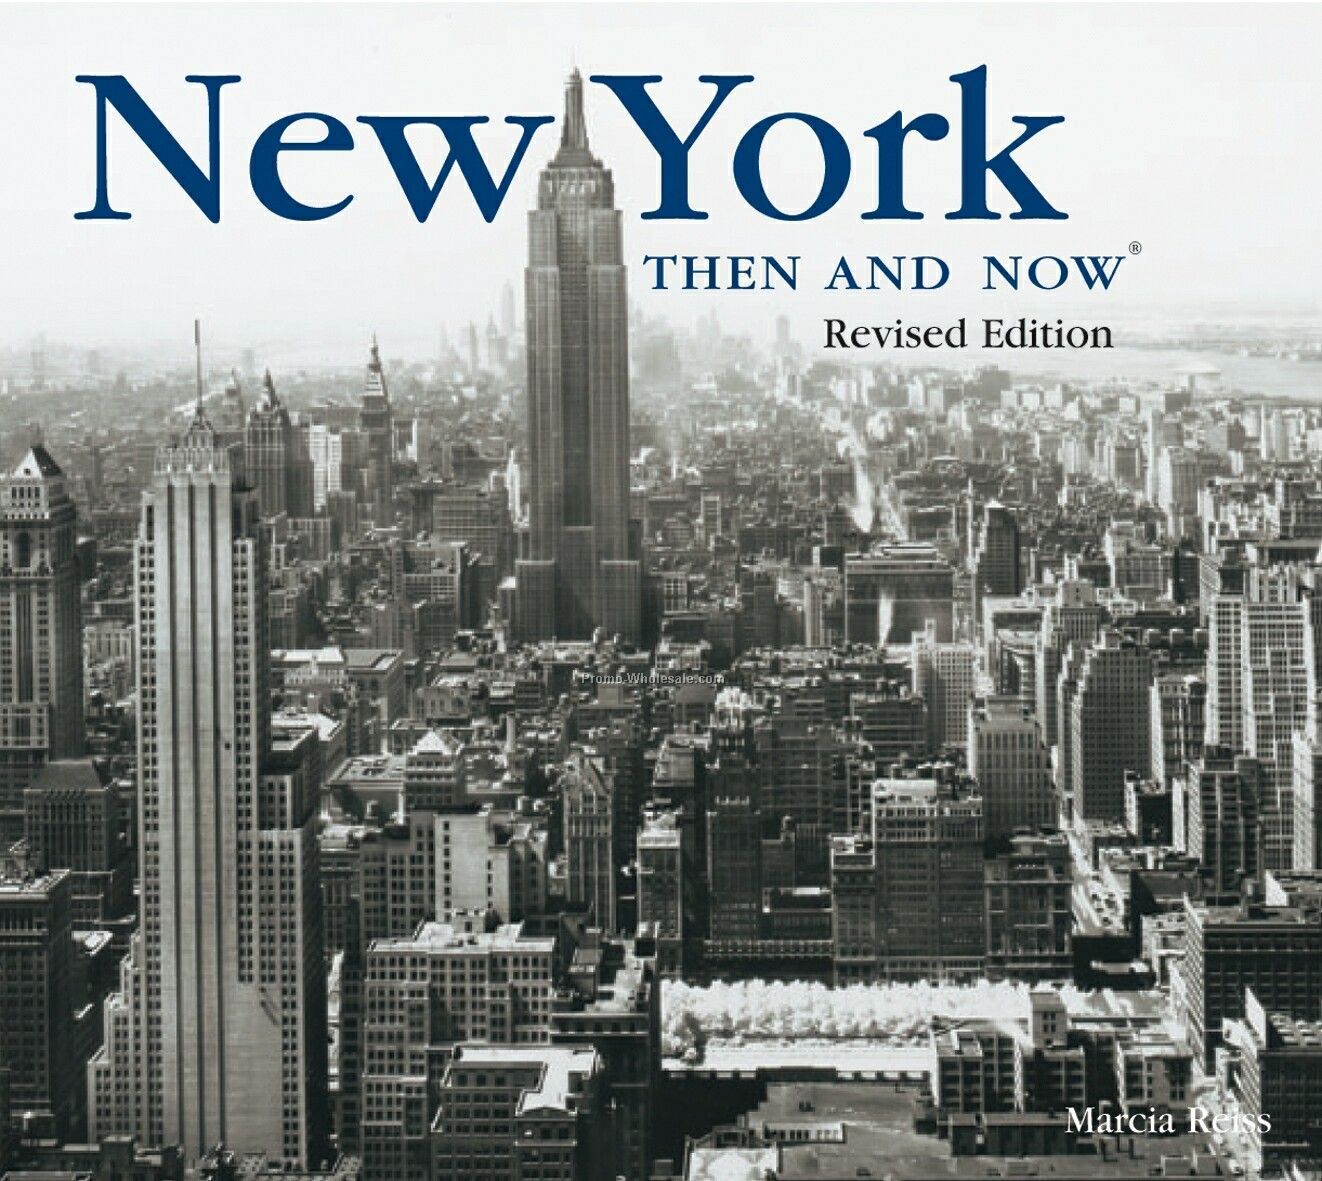 Coffee Table Gift Books - Hardcover Edition - New York Then And Now